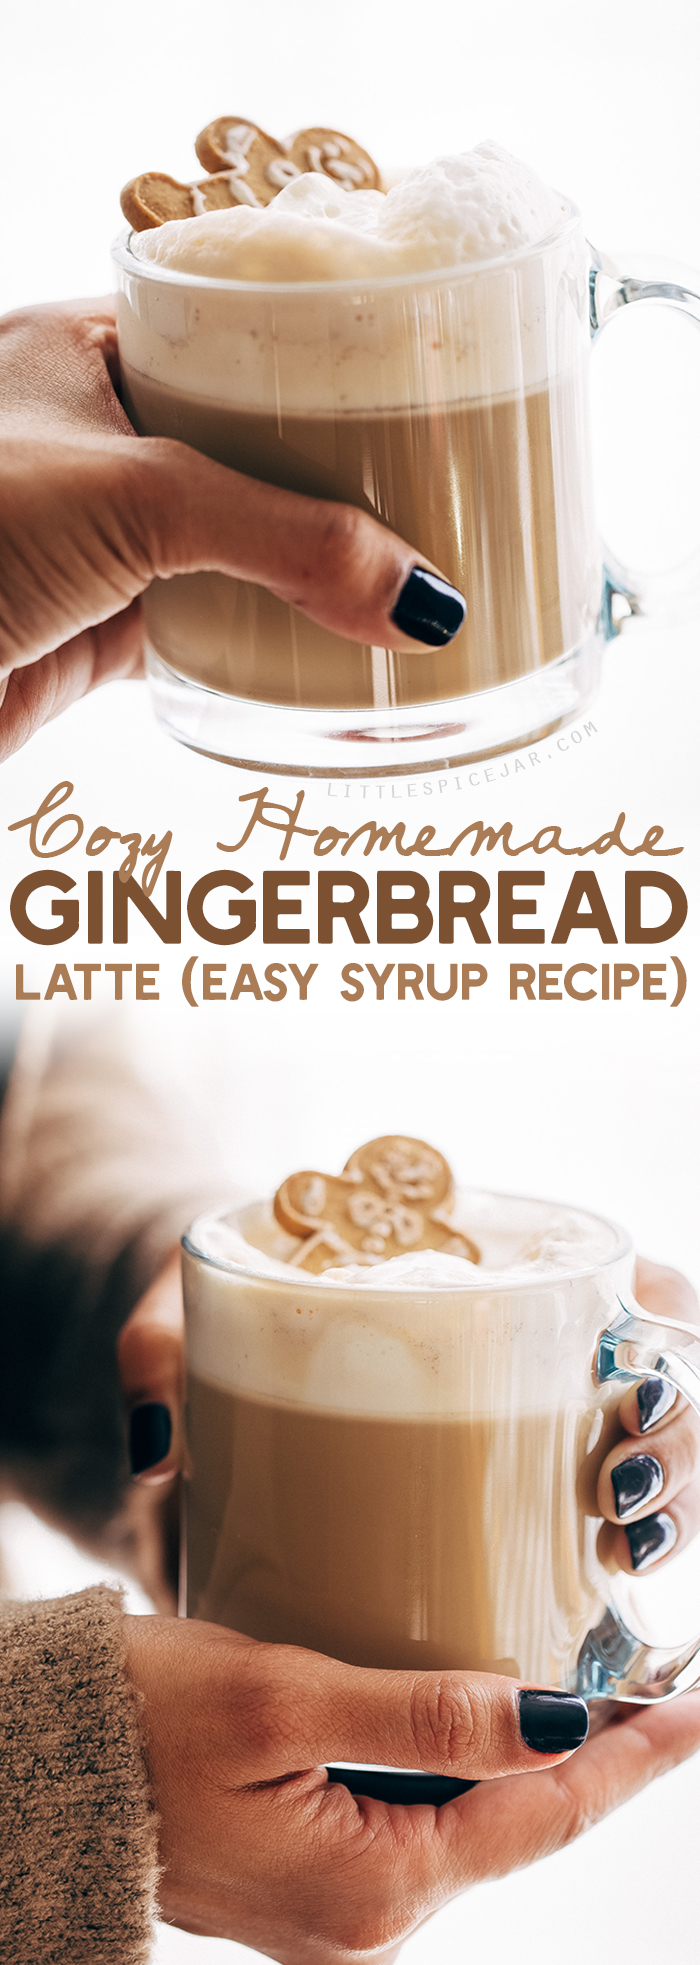 Cozy Homemade Gingerbread Latte - Learn how to make a gingerbread latte at home with simple ingredients! #gingerbreadlatte #latte #homemadelatte #gingerbreadsyrup | Littlespicejar.com